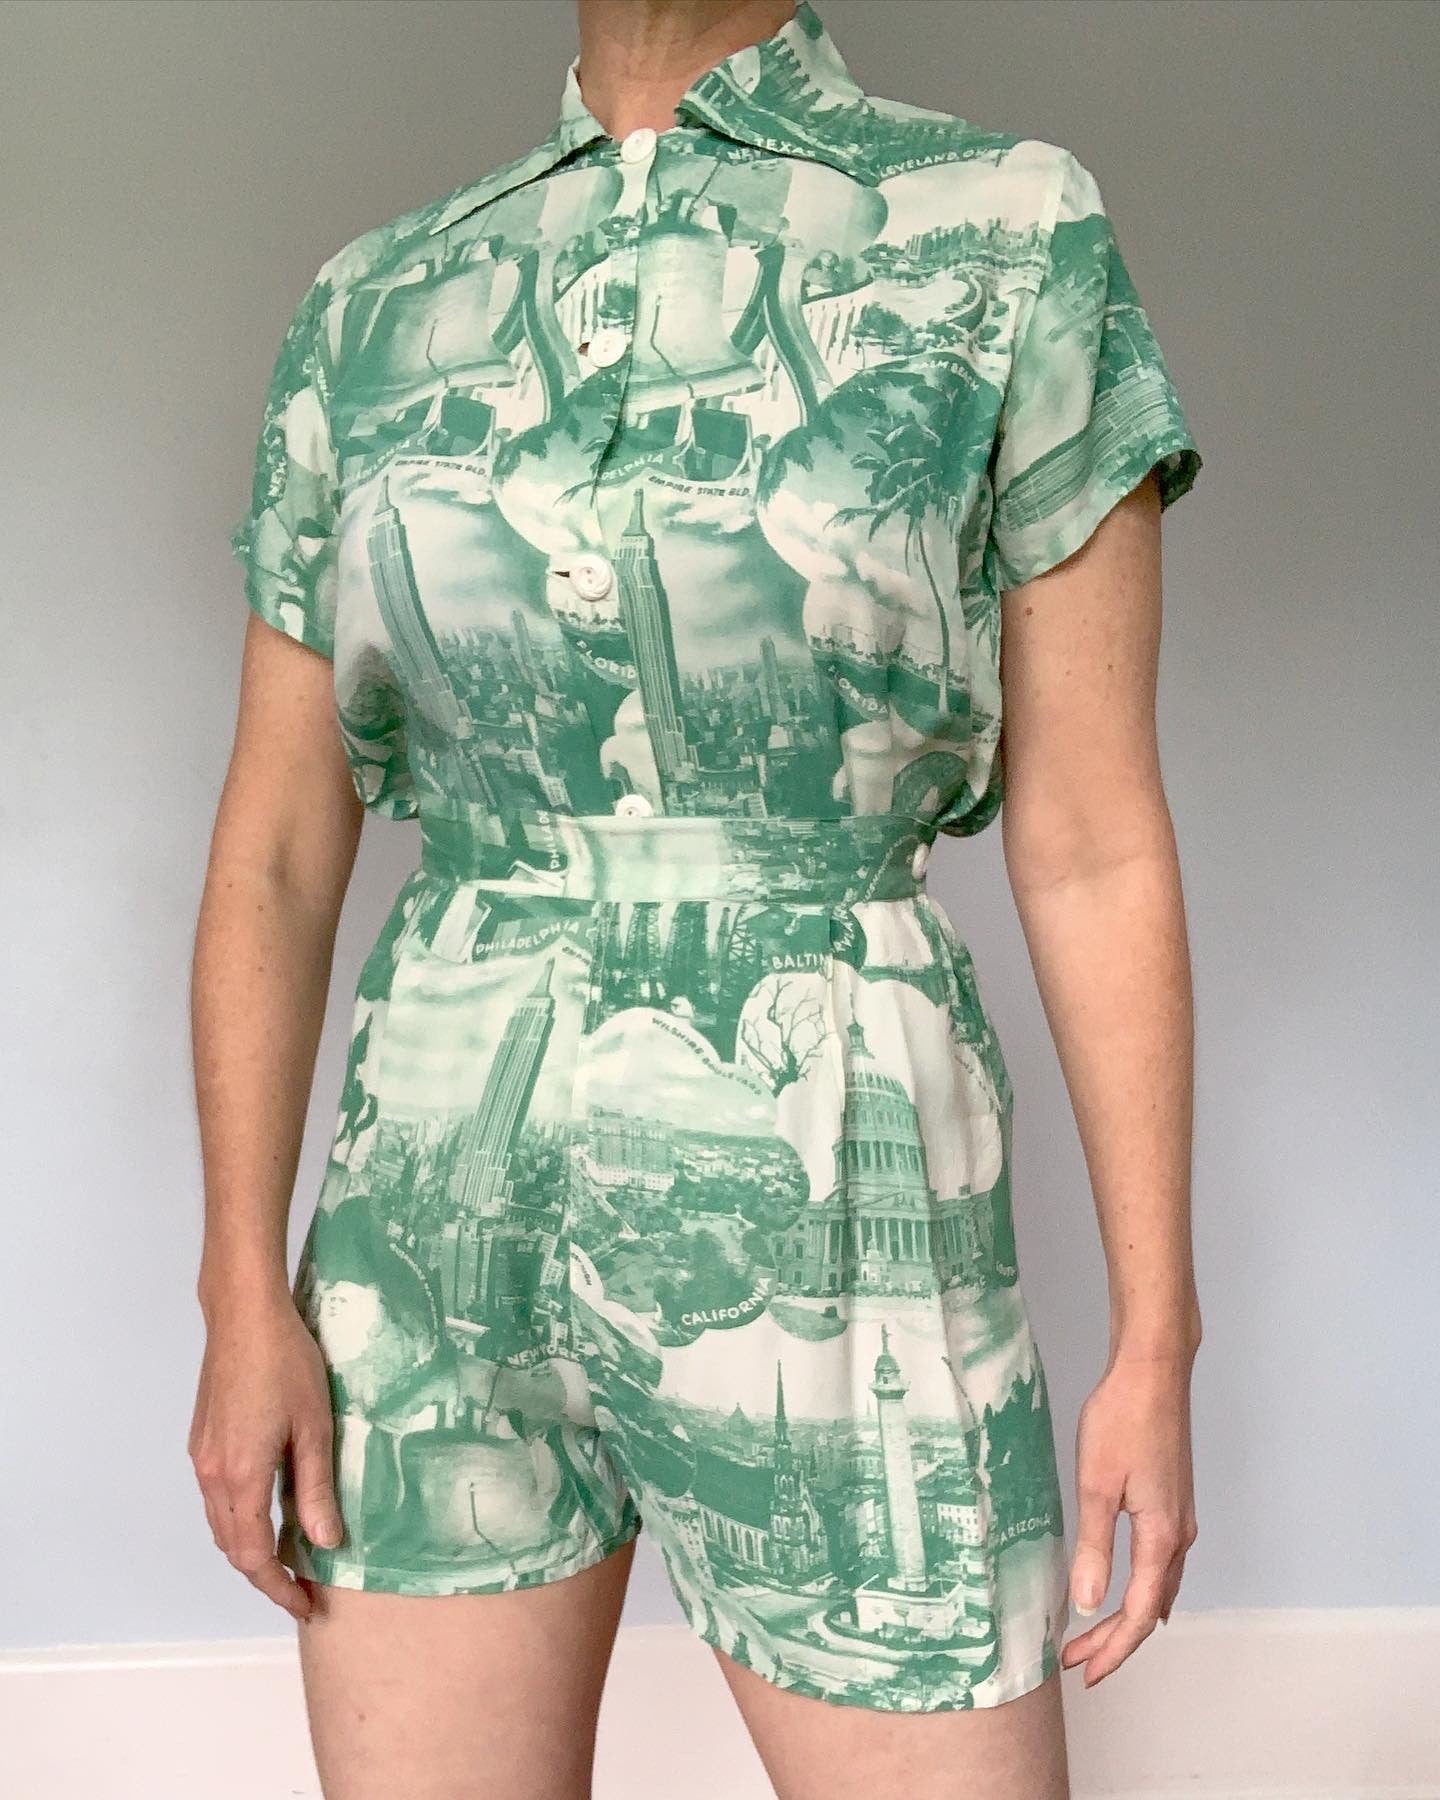 1940s 2 Piece Cold Rayon Playsuit with United States Landmarks / Monuments Photo Print